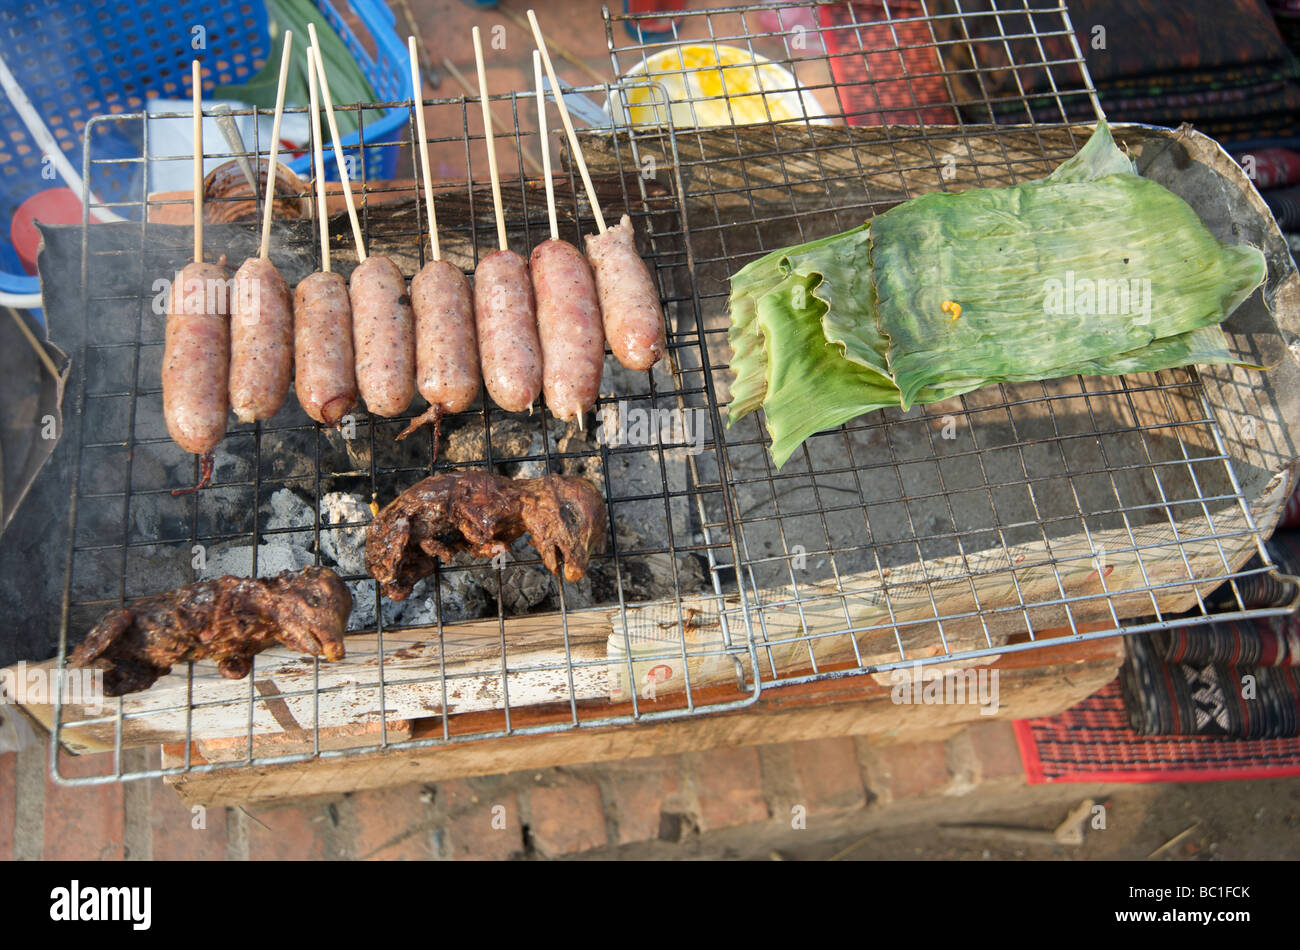 A street kitchen in Luang Prabang grilling sausages and small jungle animals Stock Photo